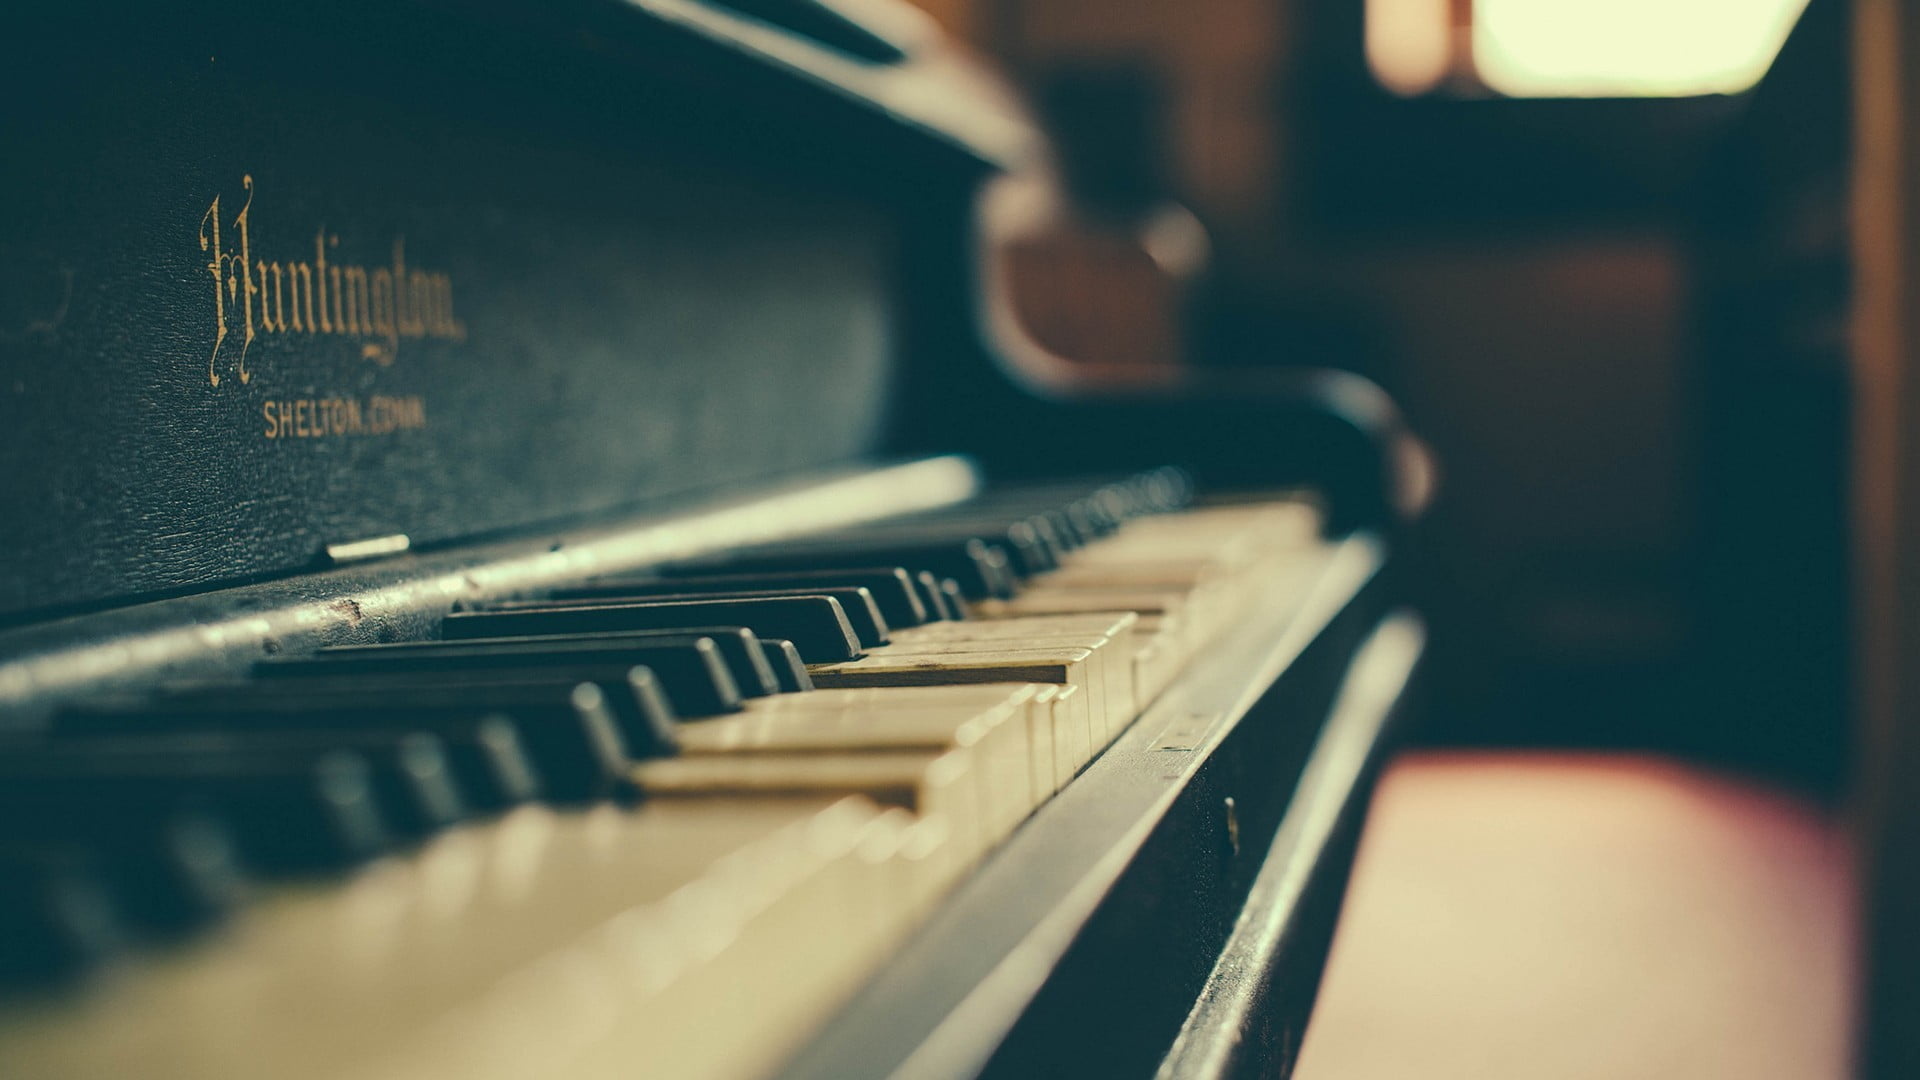 Grand Piano: Huntington, Keyboard instrument in which the strings, soundboard, and mechanical part are arranged horizontally. 1920x1080 Full HD Background.